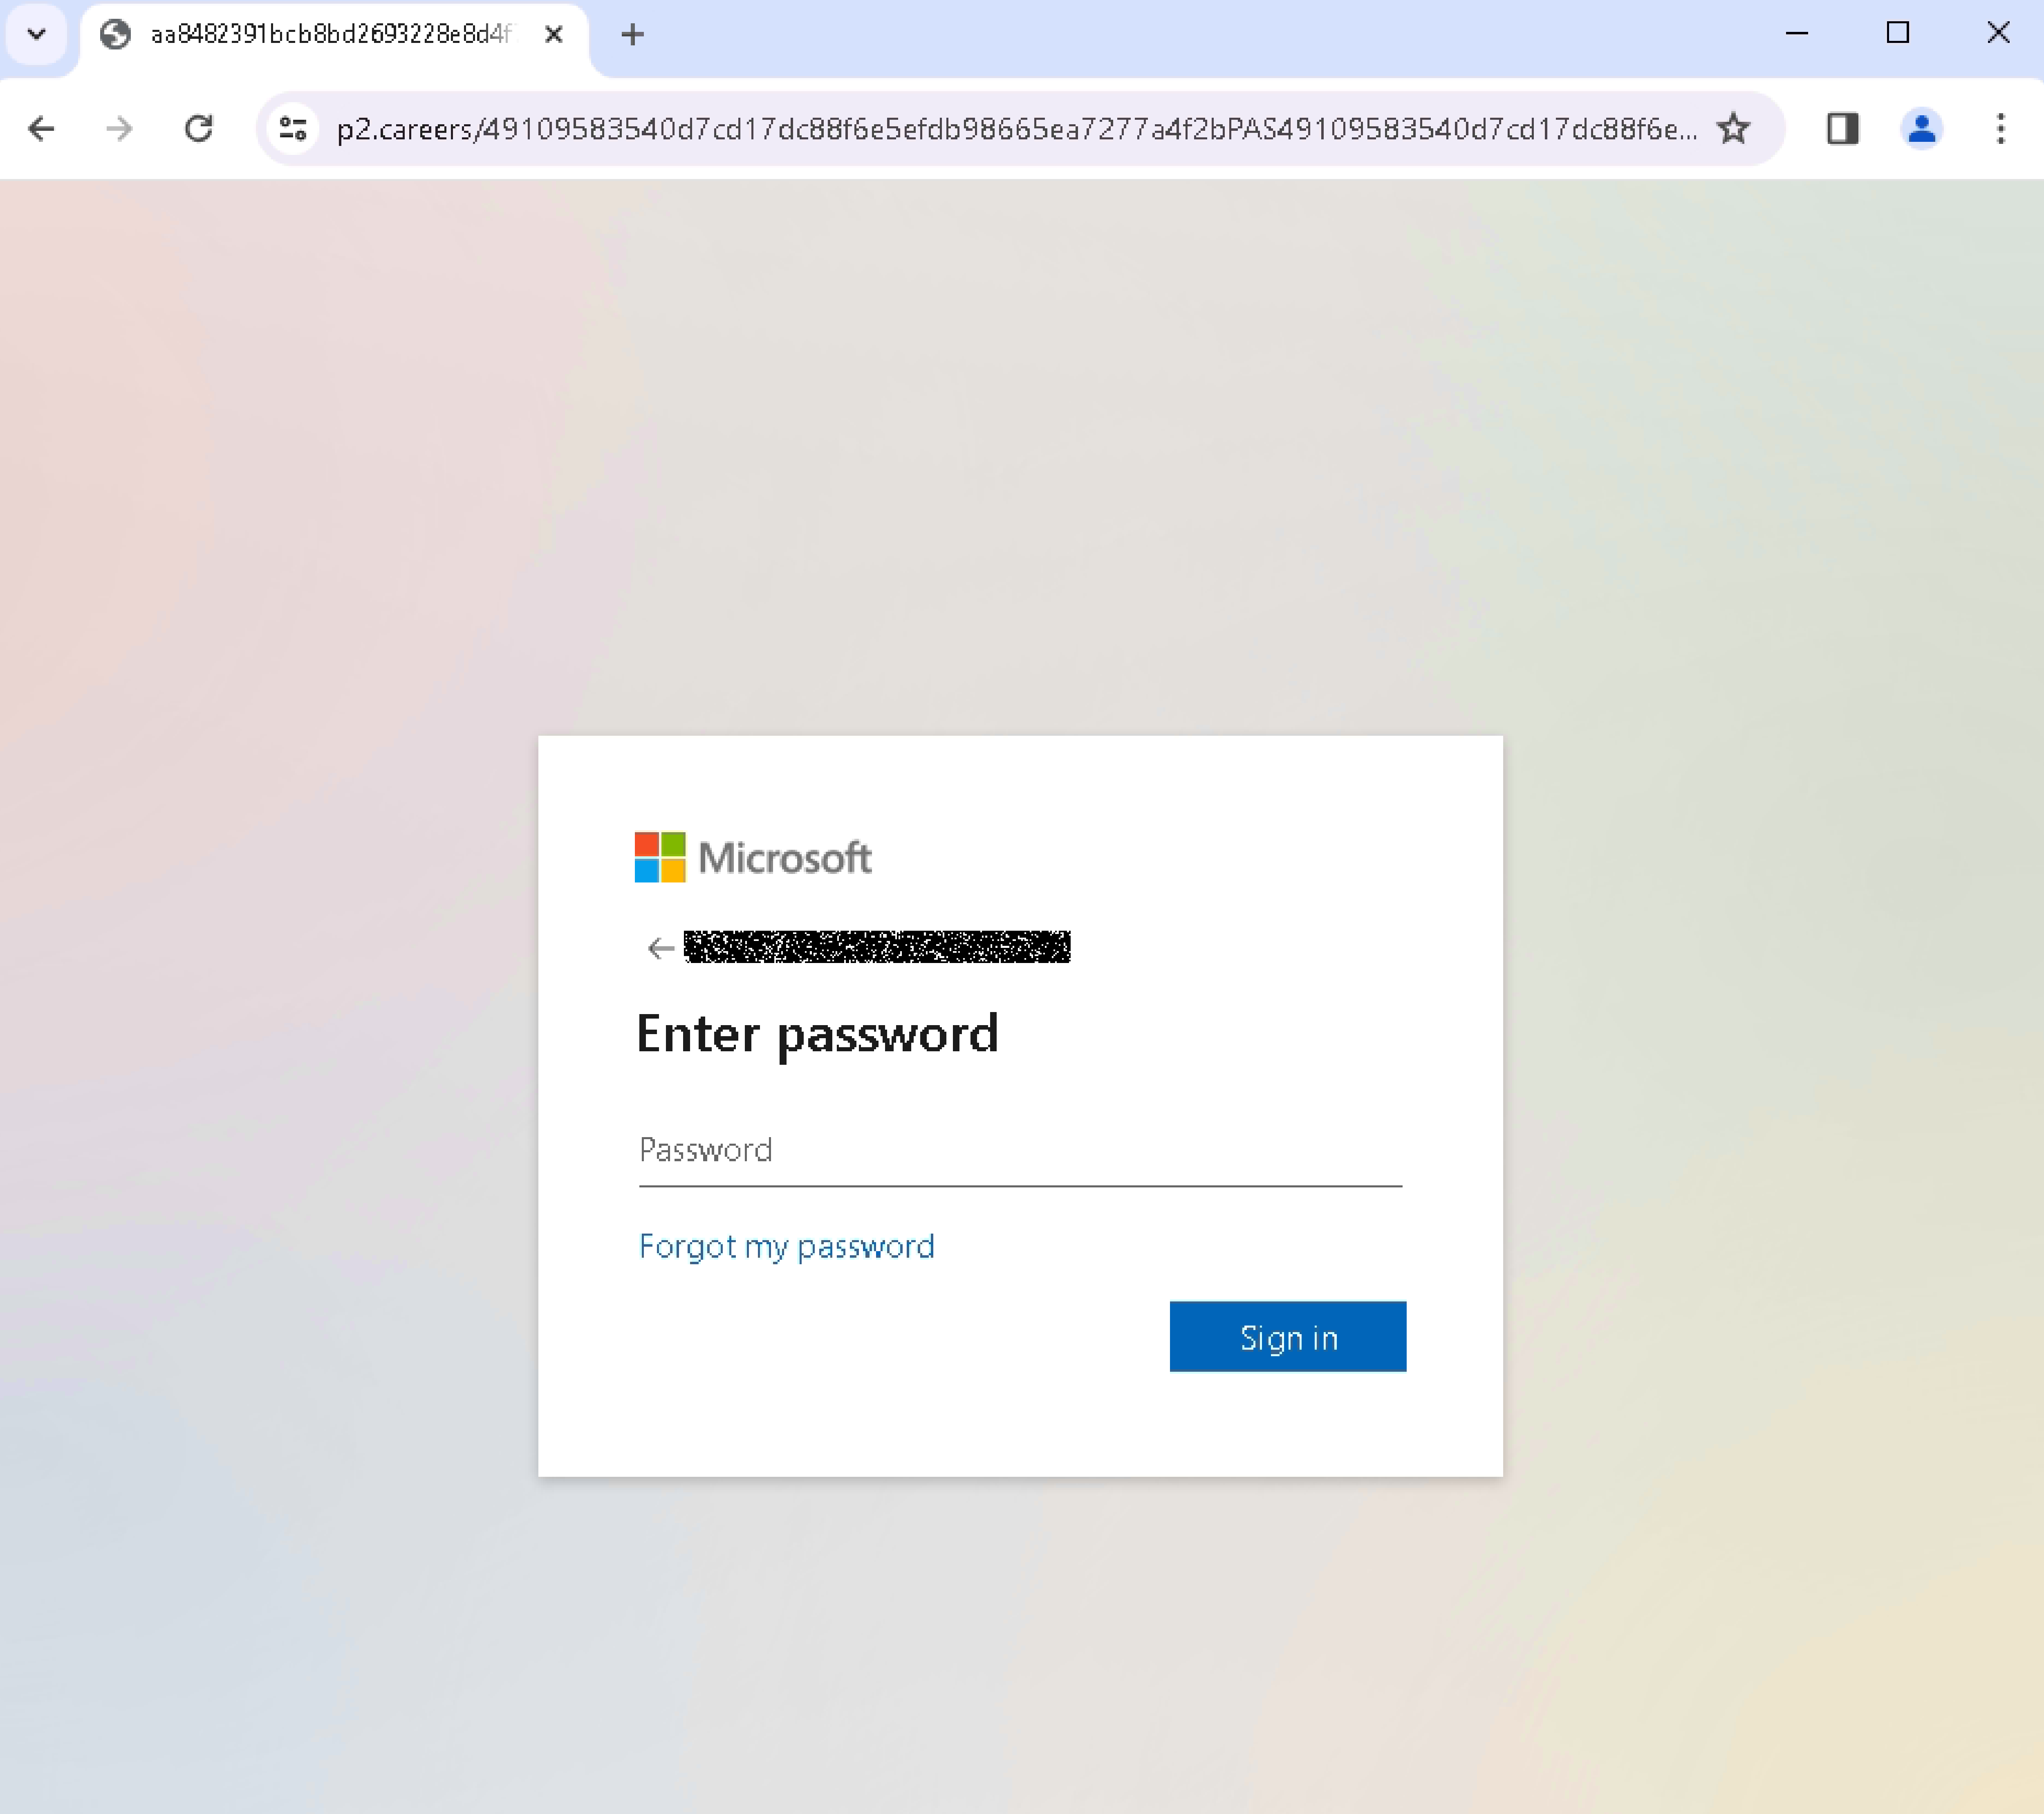 password2-masked-microsoft-re-auth-0324